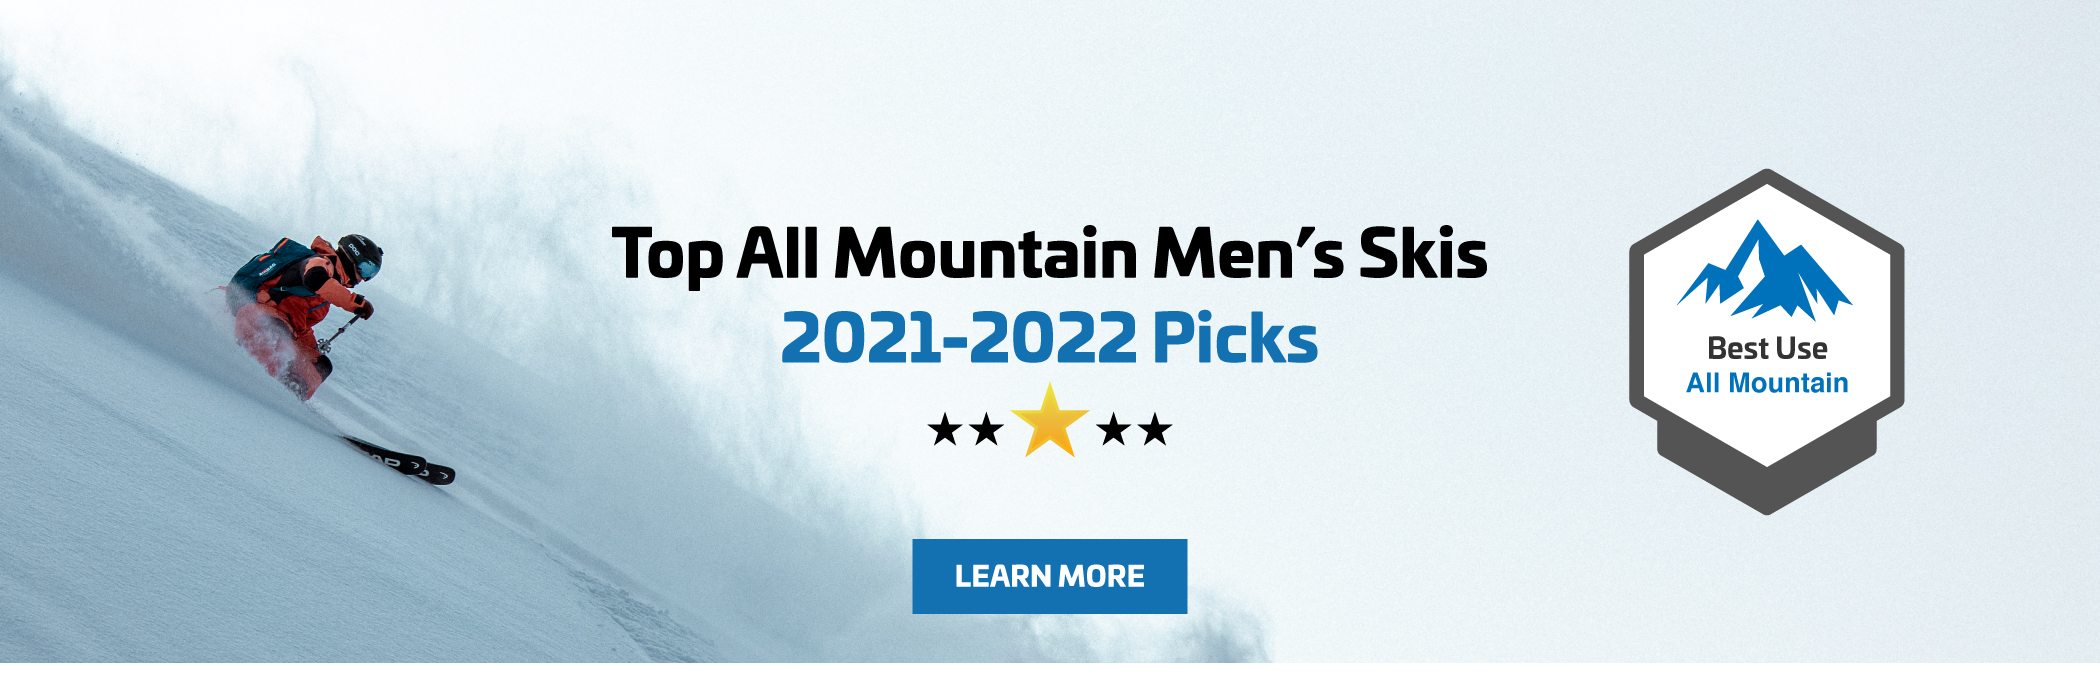 TOP ALL MOUNTAIN MEN'S SKIS - LEARN MORE